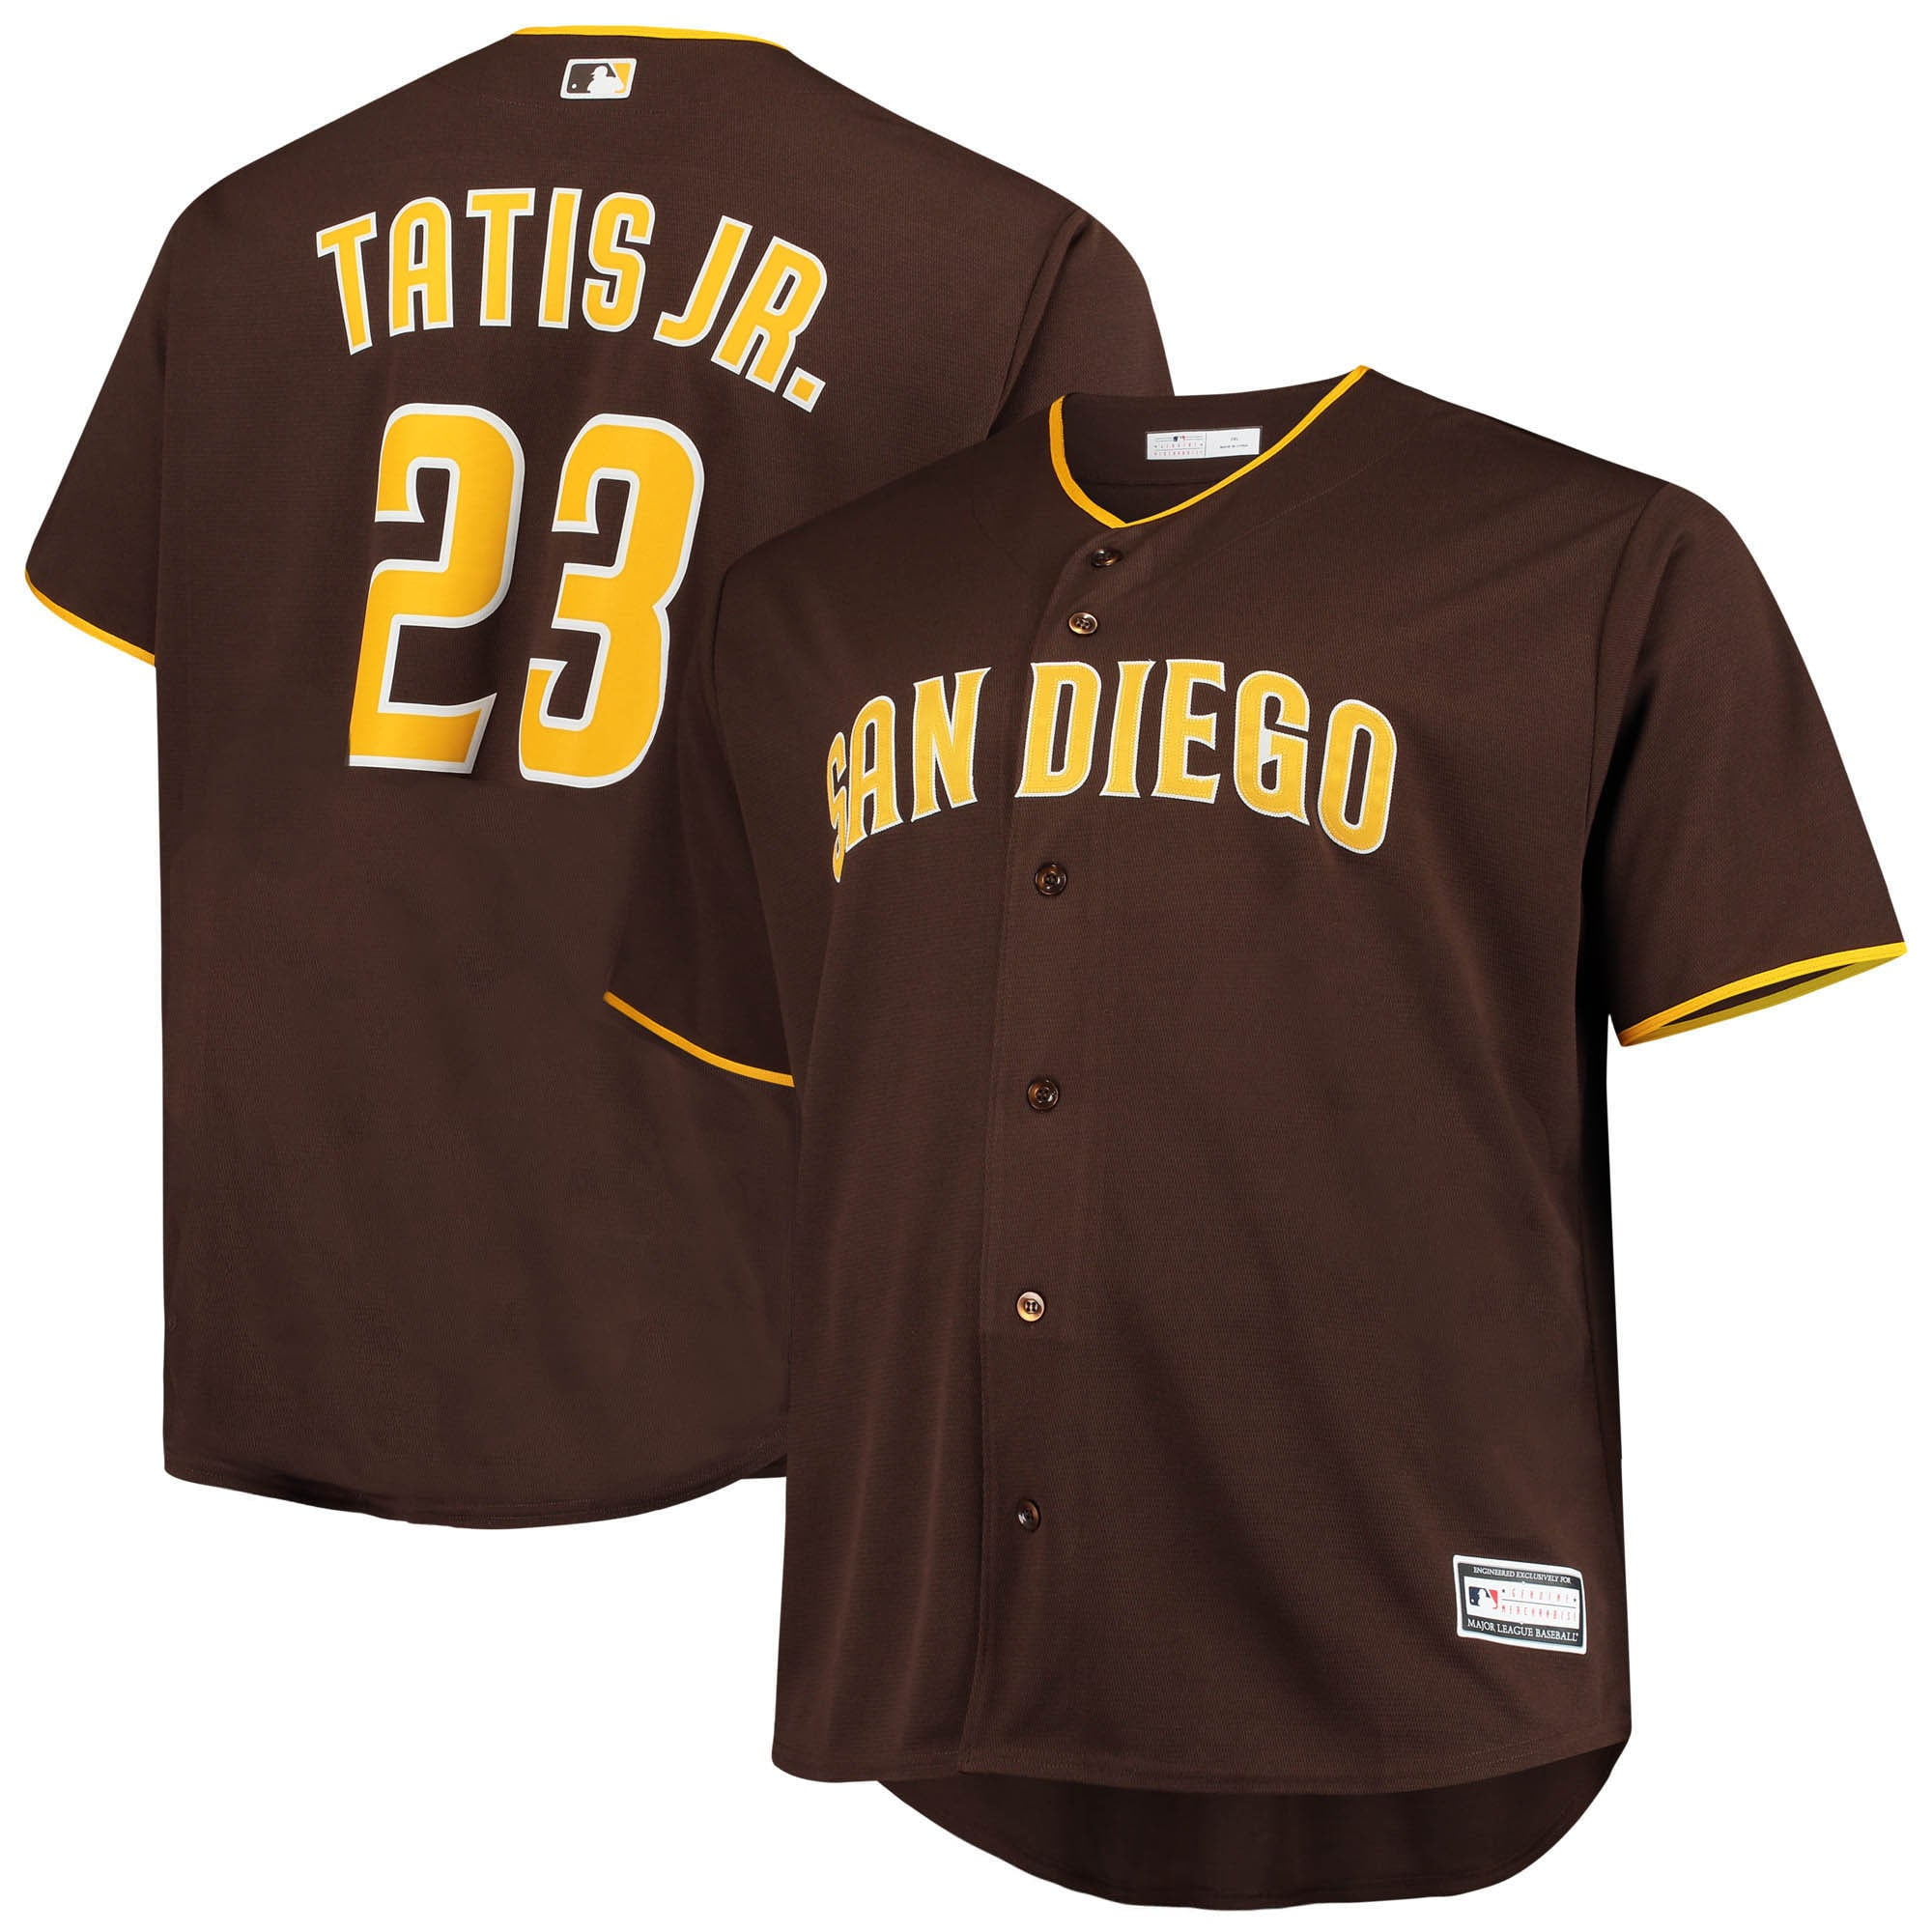 padres jersey today